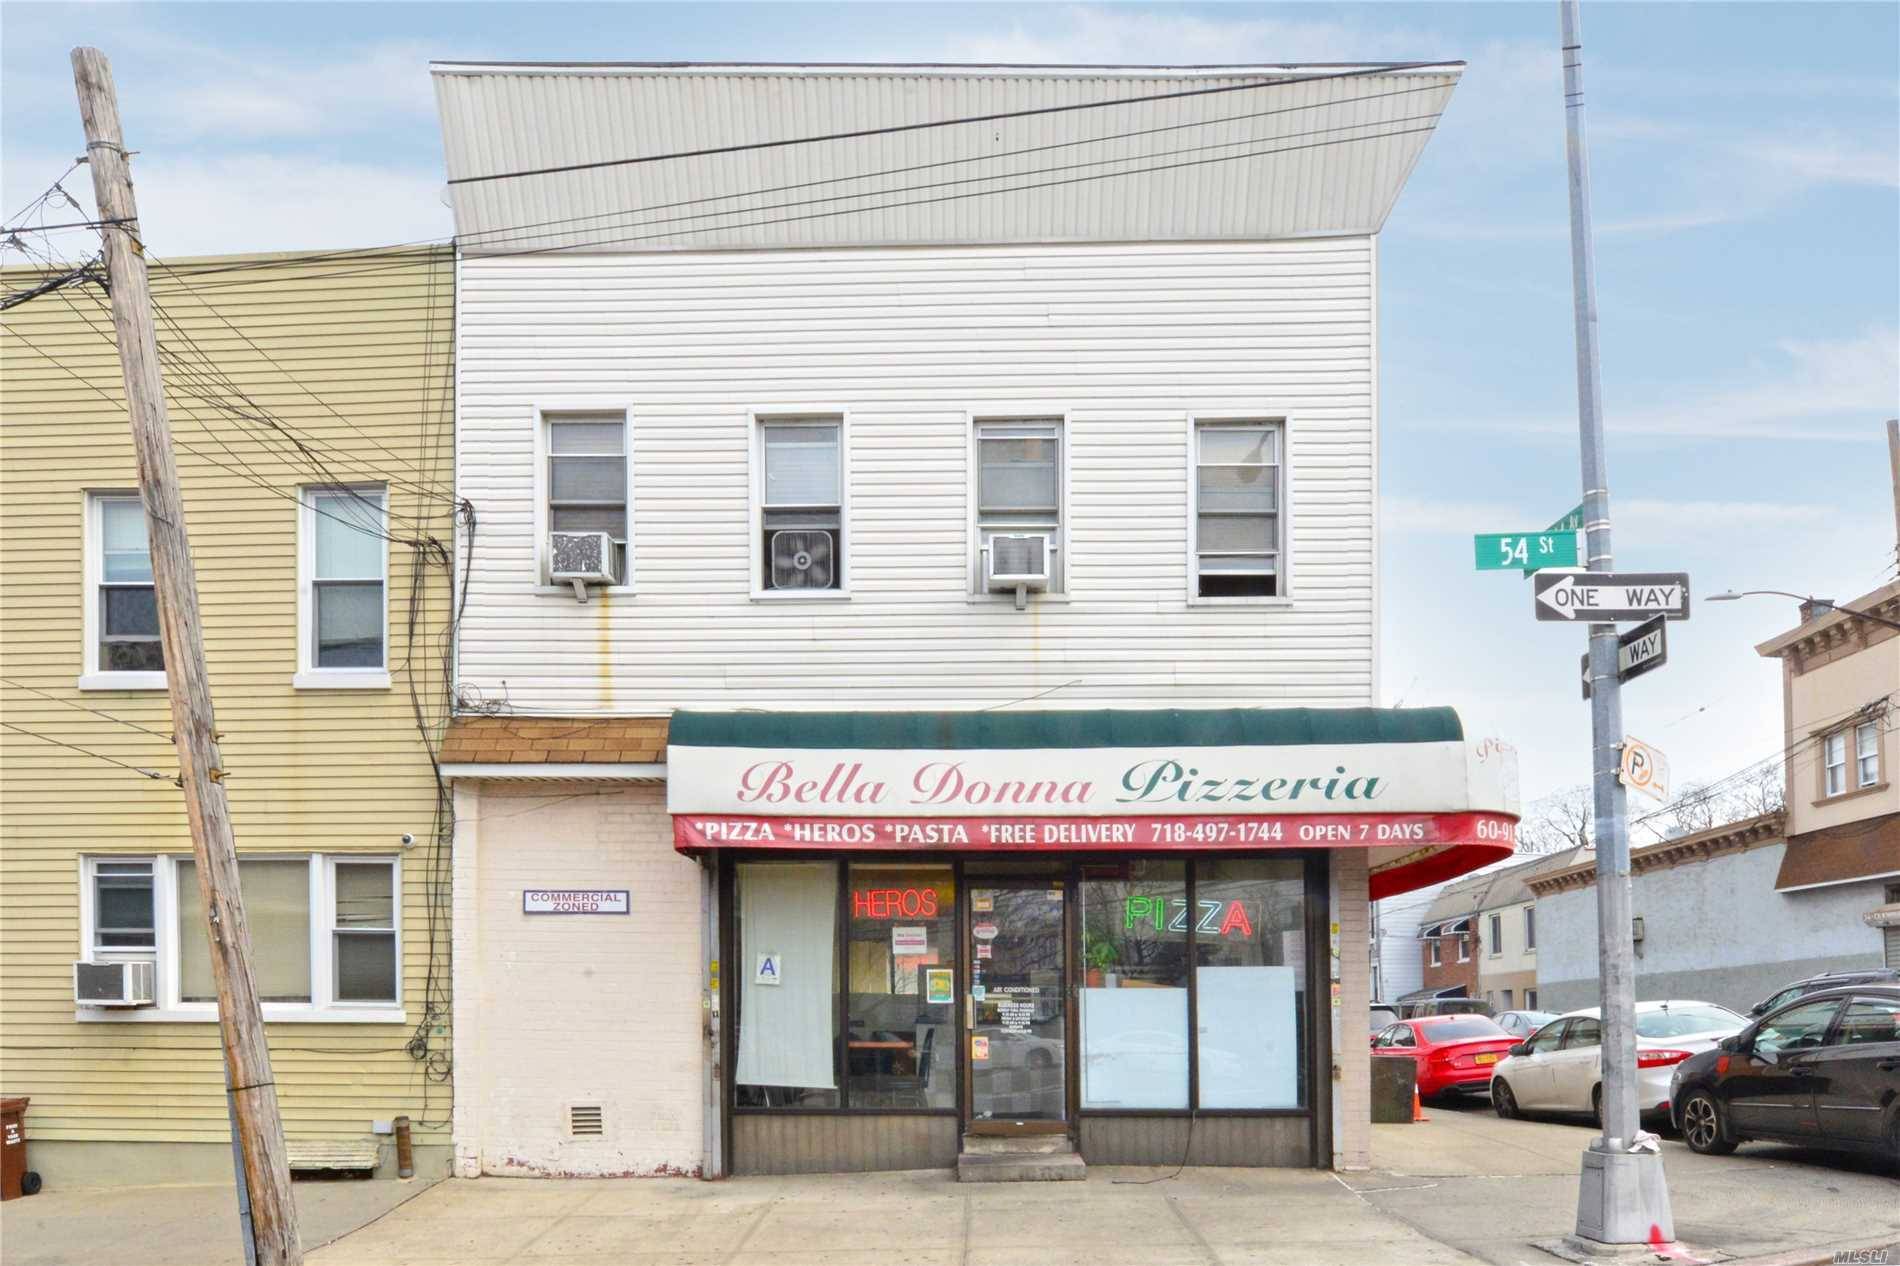 Mixed Use Building on Corner Lot facing Metropolitan Avenue ; 3 Apartments 2 BR ; 2 BR ; 3 BR and Pizza Store ; Enclosed Parking Lot with 3 Spaces.